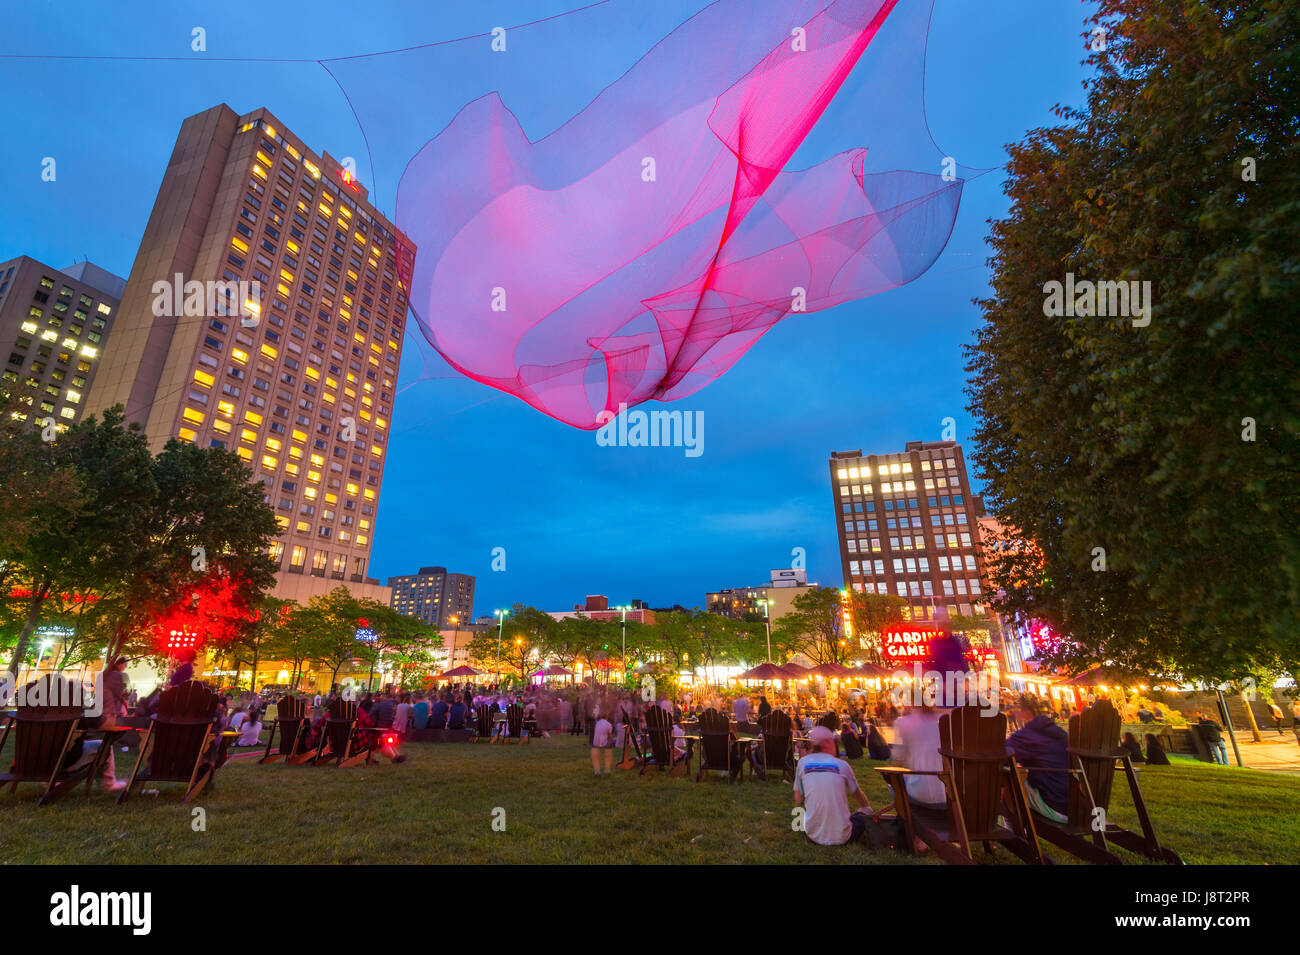 Montreal, CA - 27 May 2017: Jardins Gamelin at Emilie Gamelin Square Stock Photo